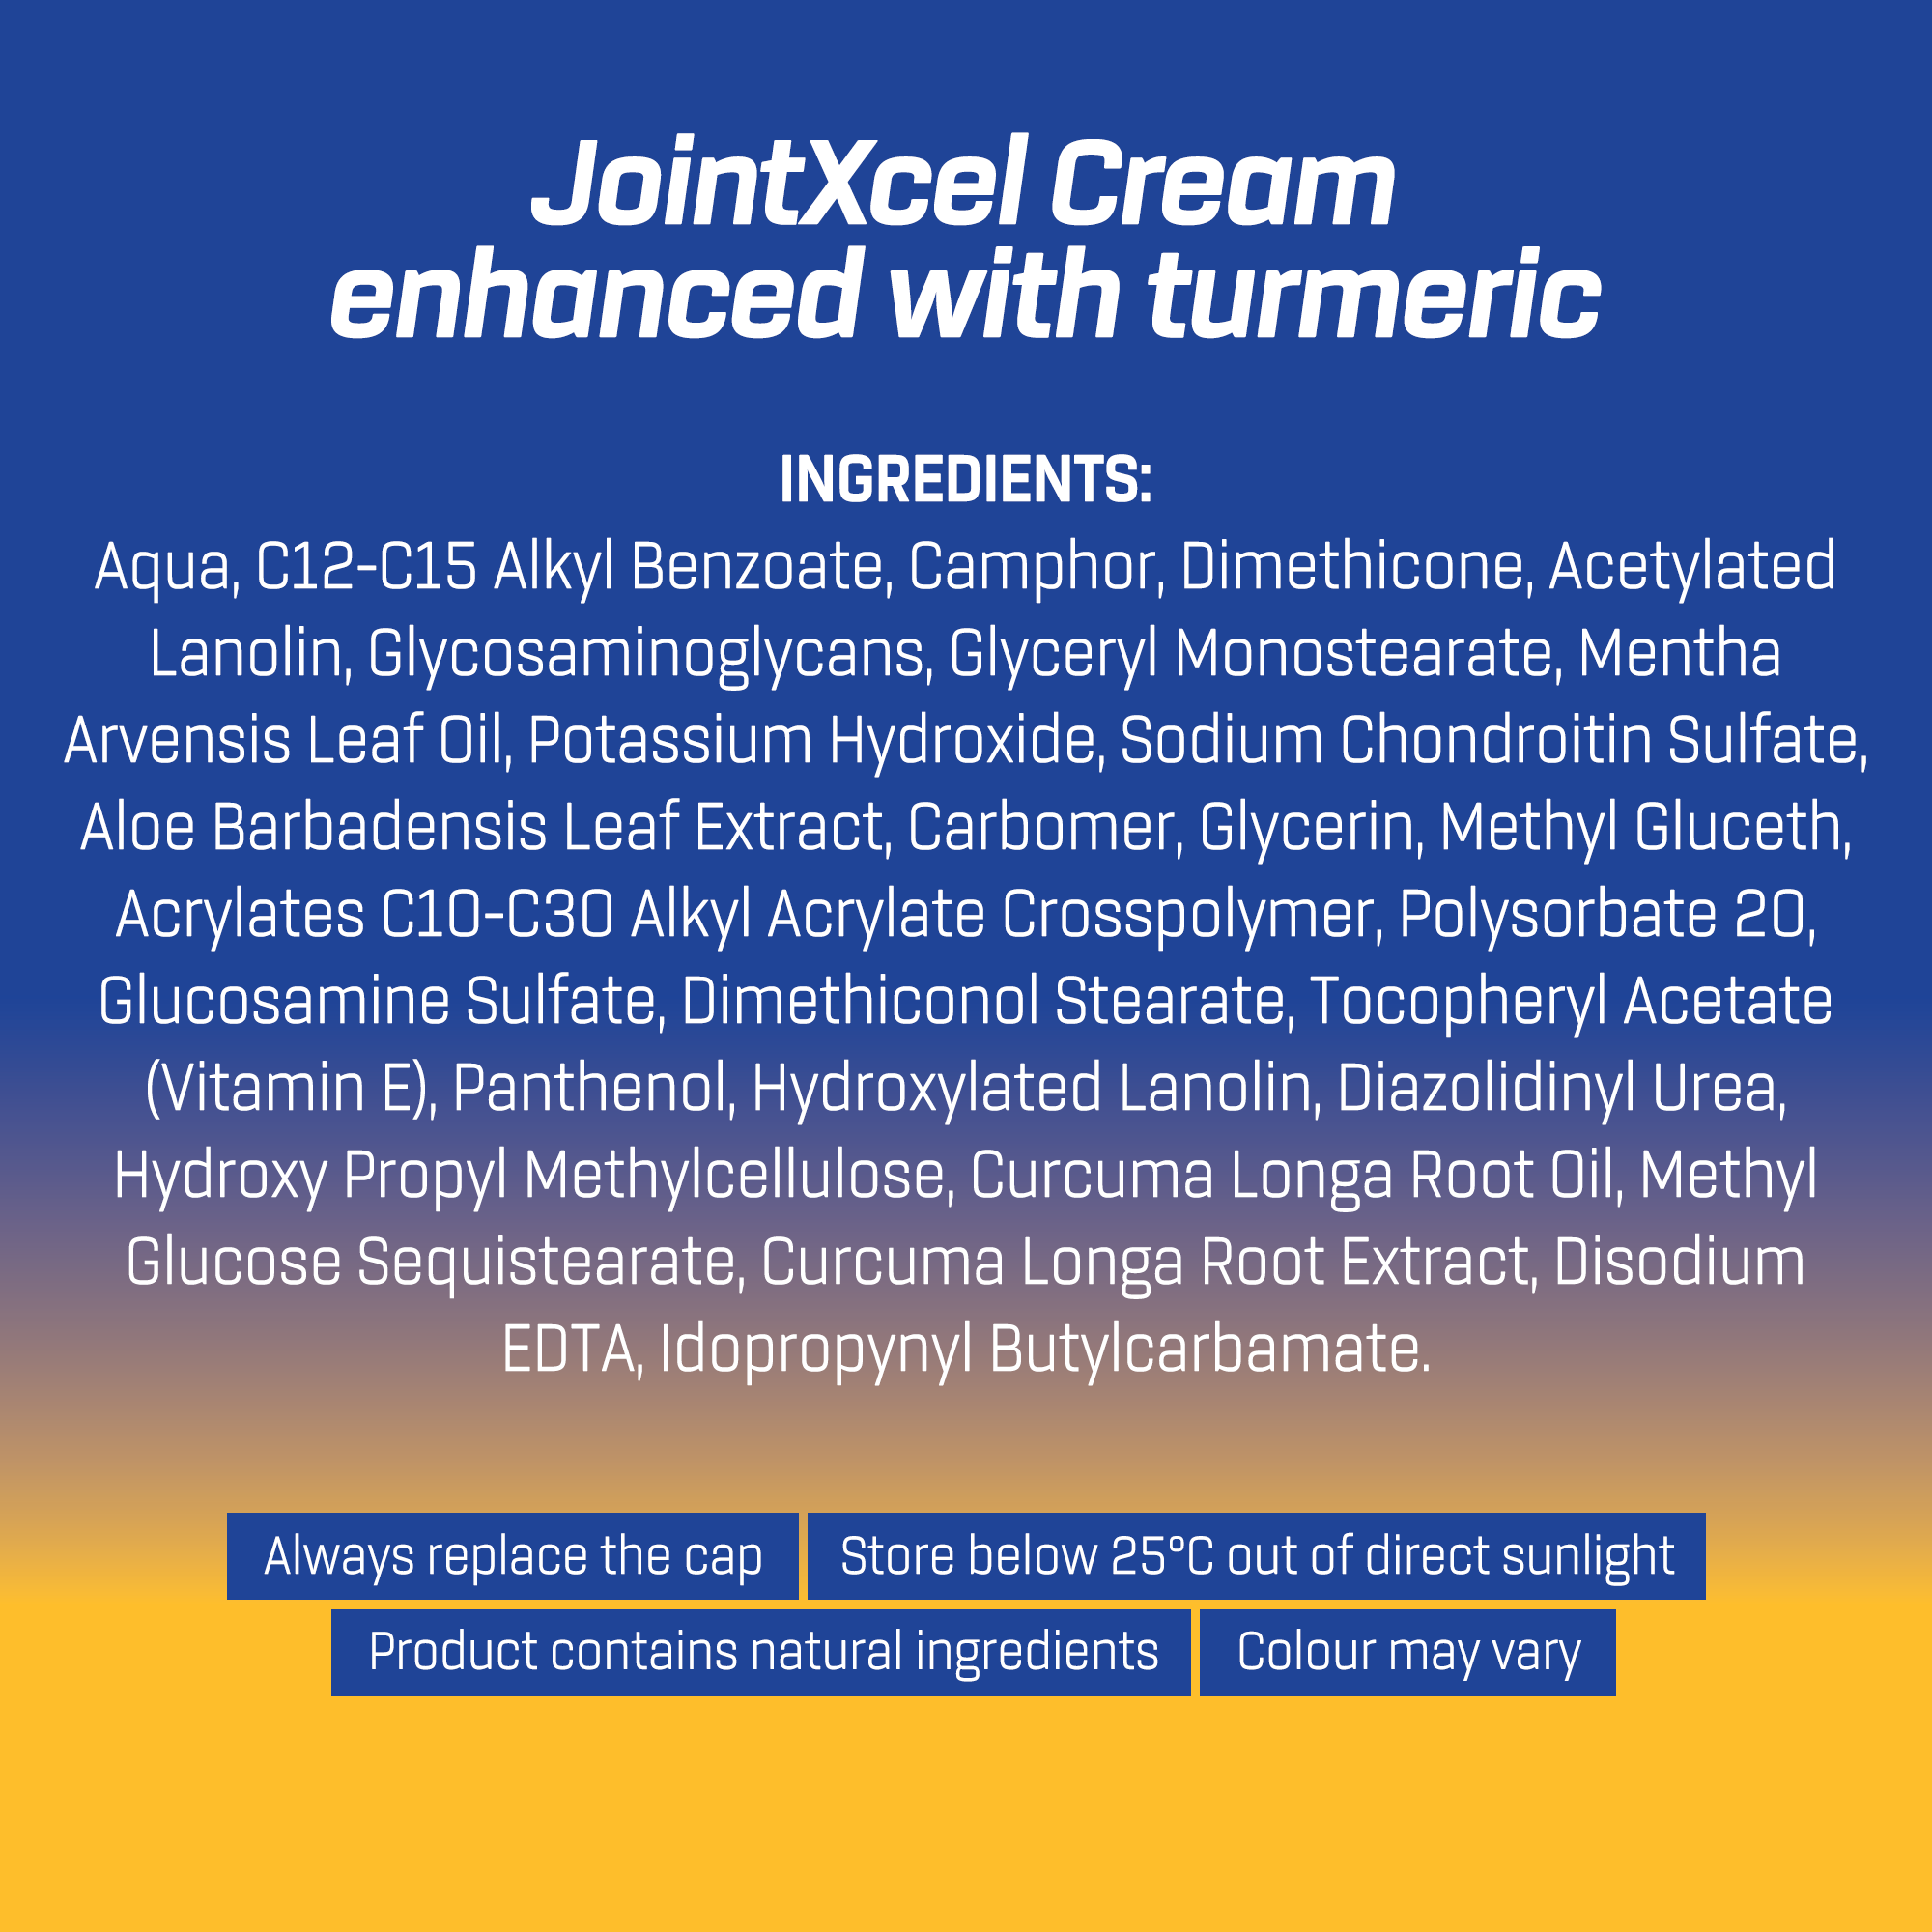 JointXcel® Joint Massage Cream With Turmeric 28g